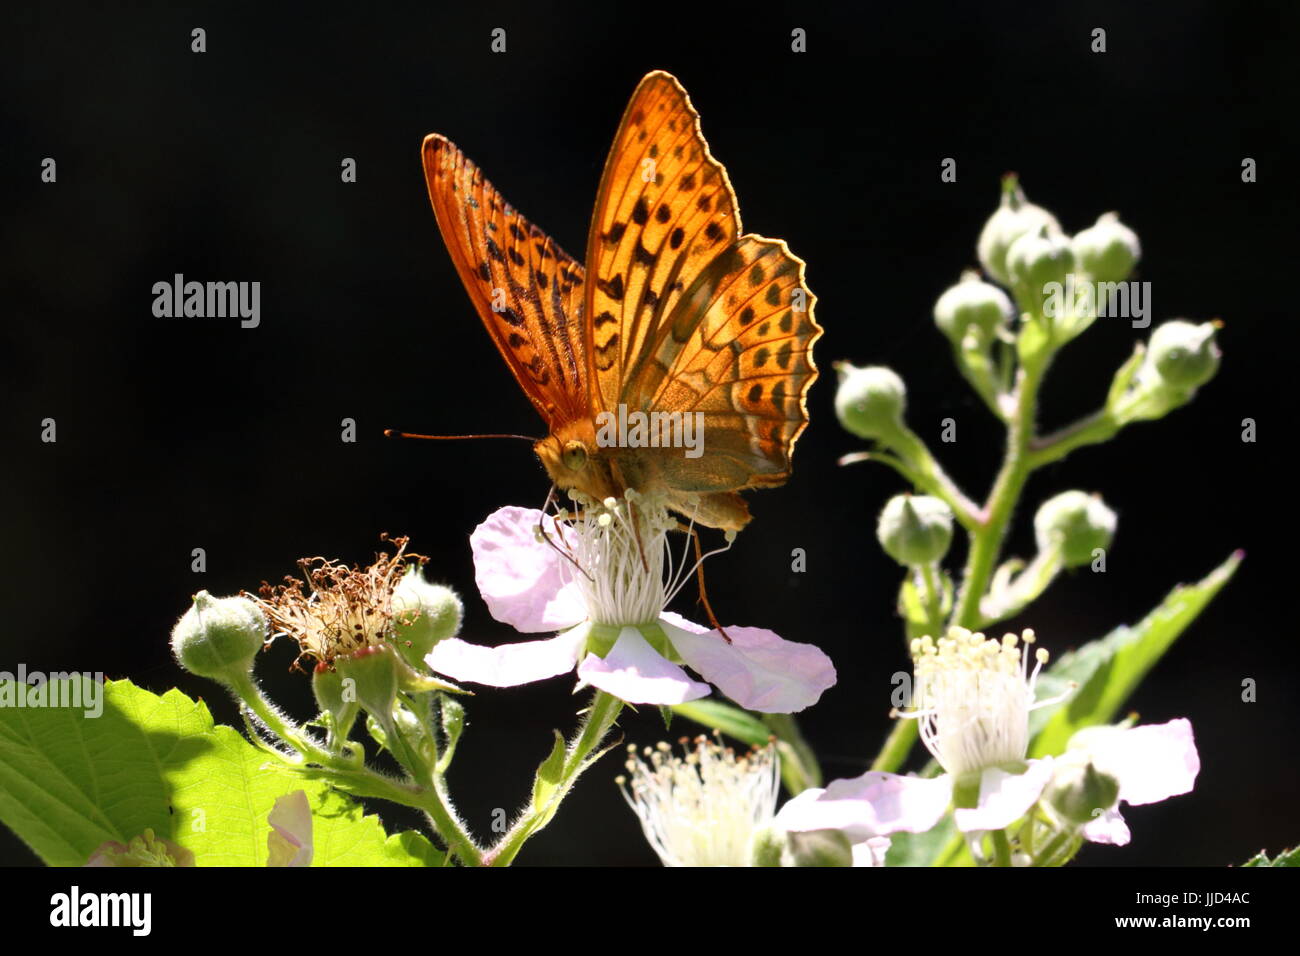 Male Silver-washed Fritillary nectaring on Blackberry blossom Stock Photo